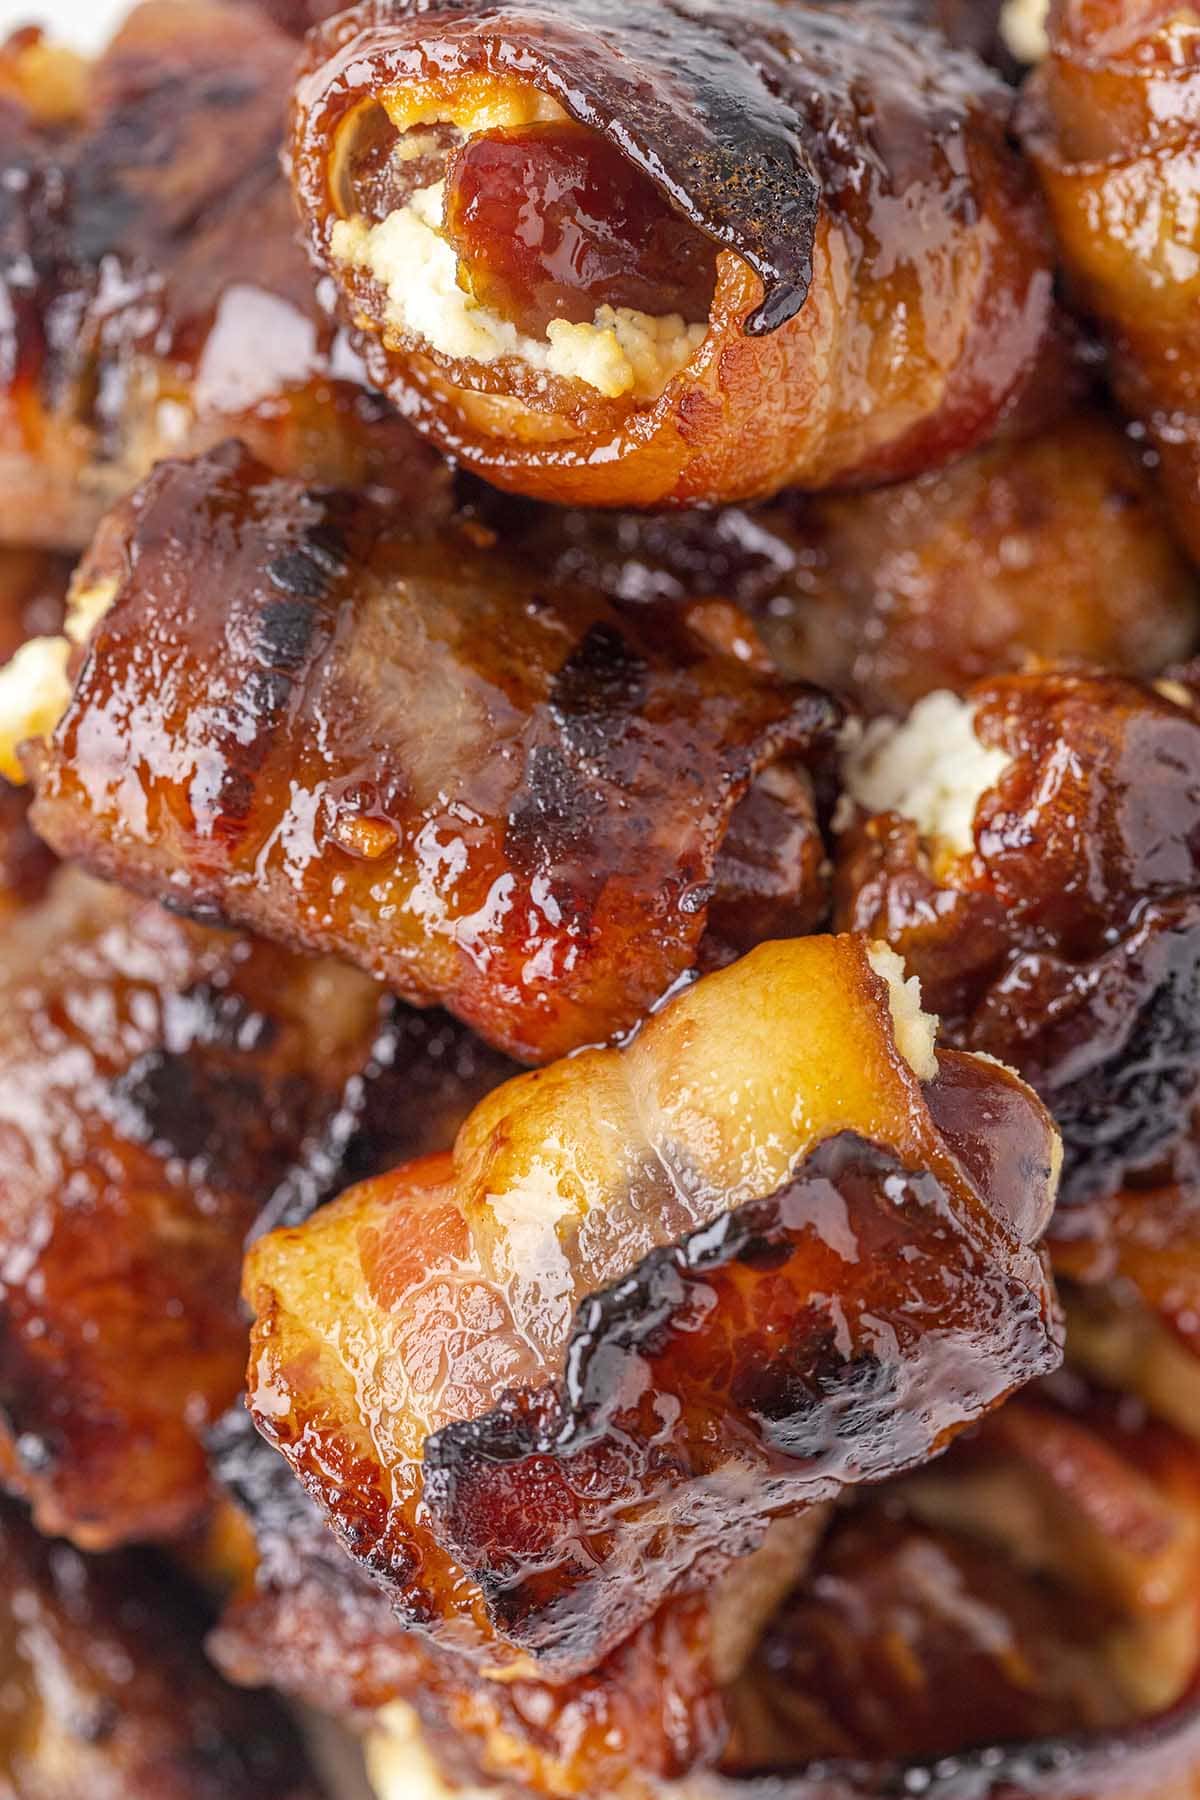 Bacon Wrapped Dates zoomed in image